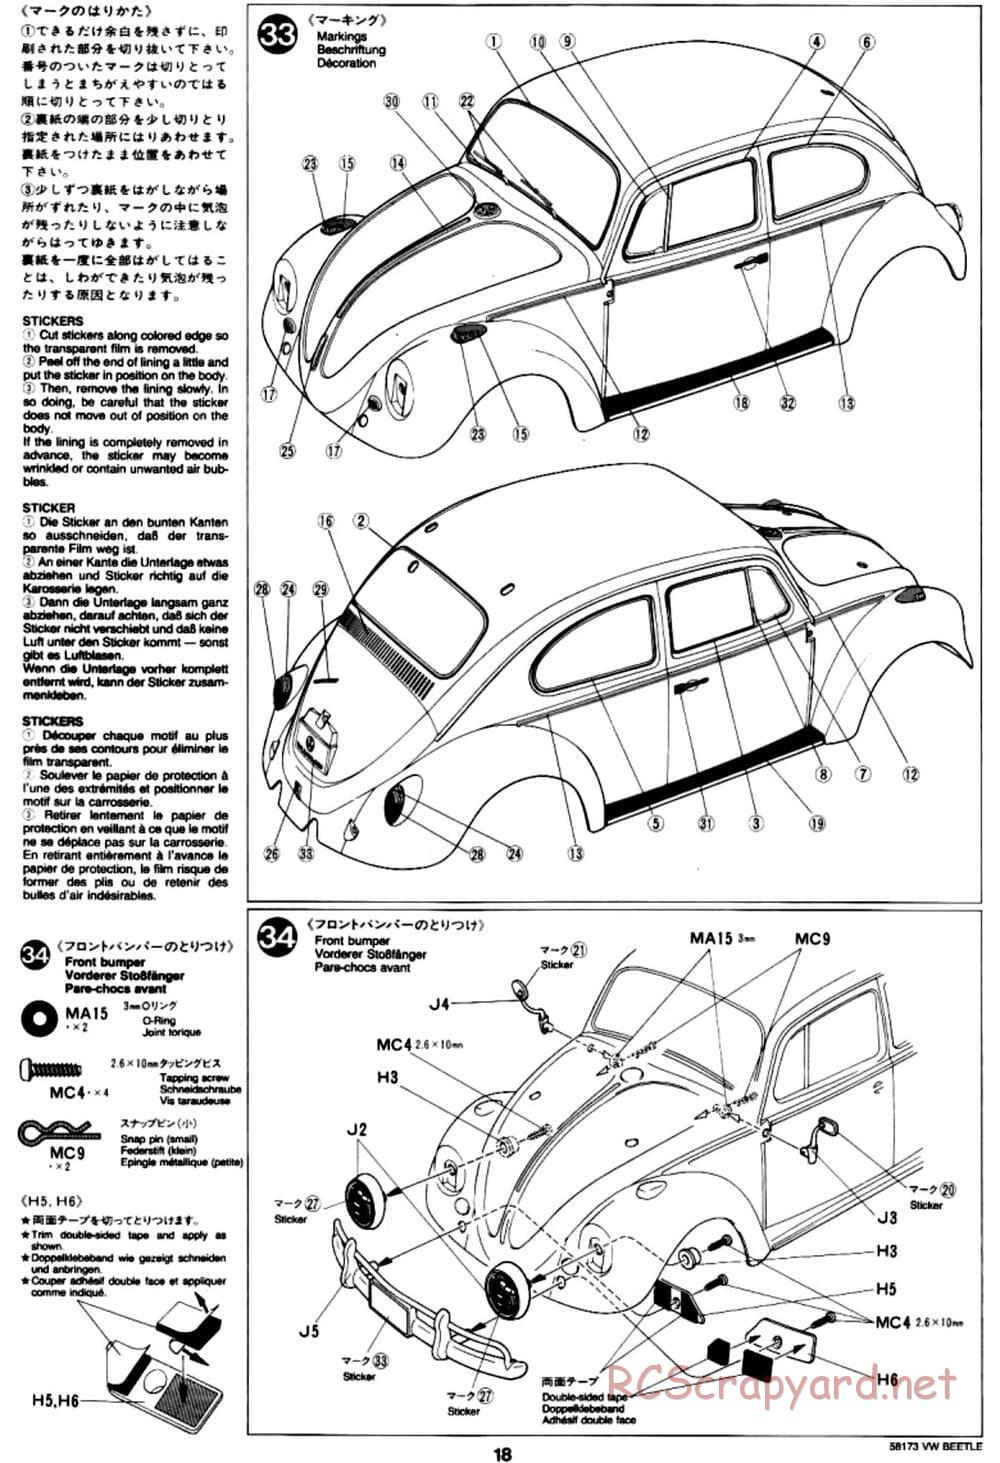 Tamiya - Volkswagen Beetle - M02L Chassis - Manual - Page 18